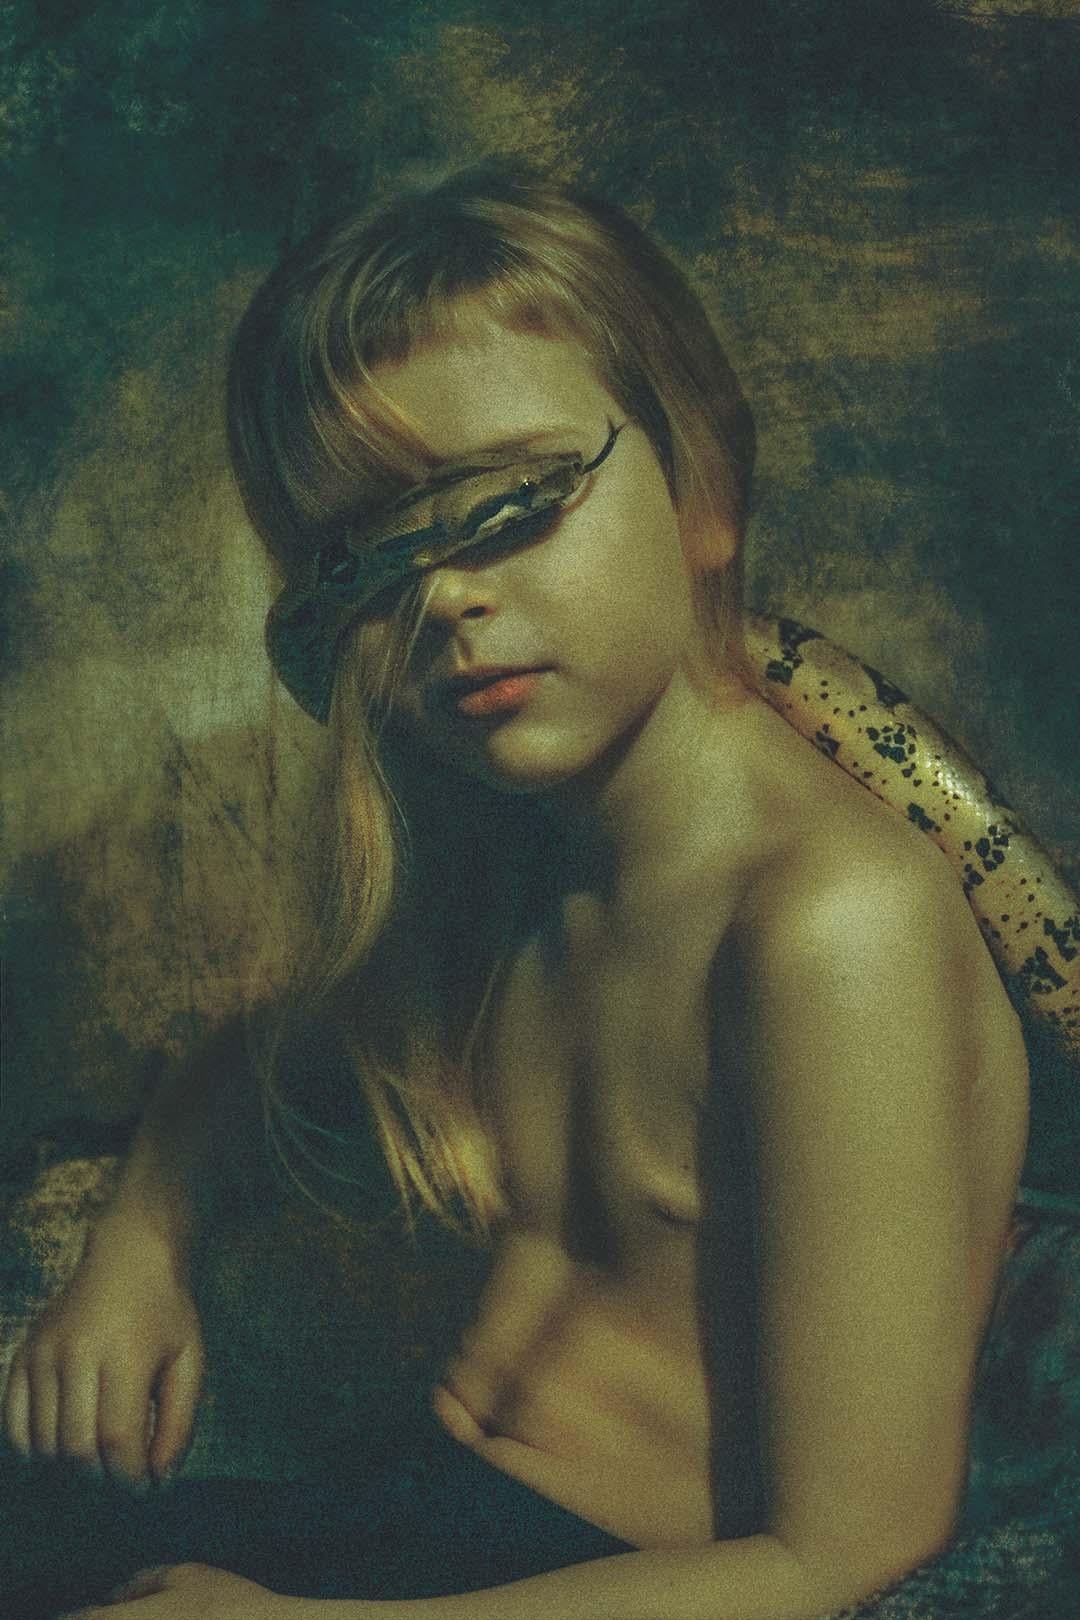 Edition 1/2


 The stunning fine art portraits by fine art photographer Laurentina Miksys have been described as opulent, timeless, and emotionally expressive. When they have a soul, images allow our sensitivity to engage with the subject and create